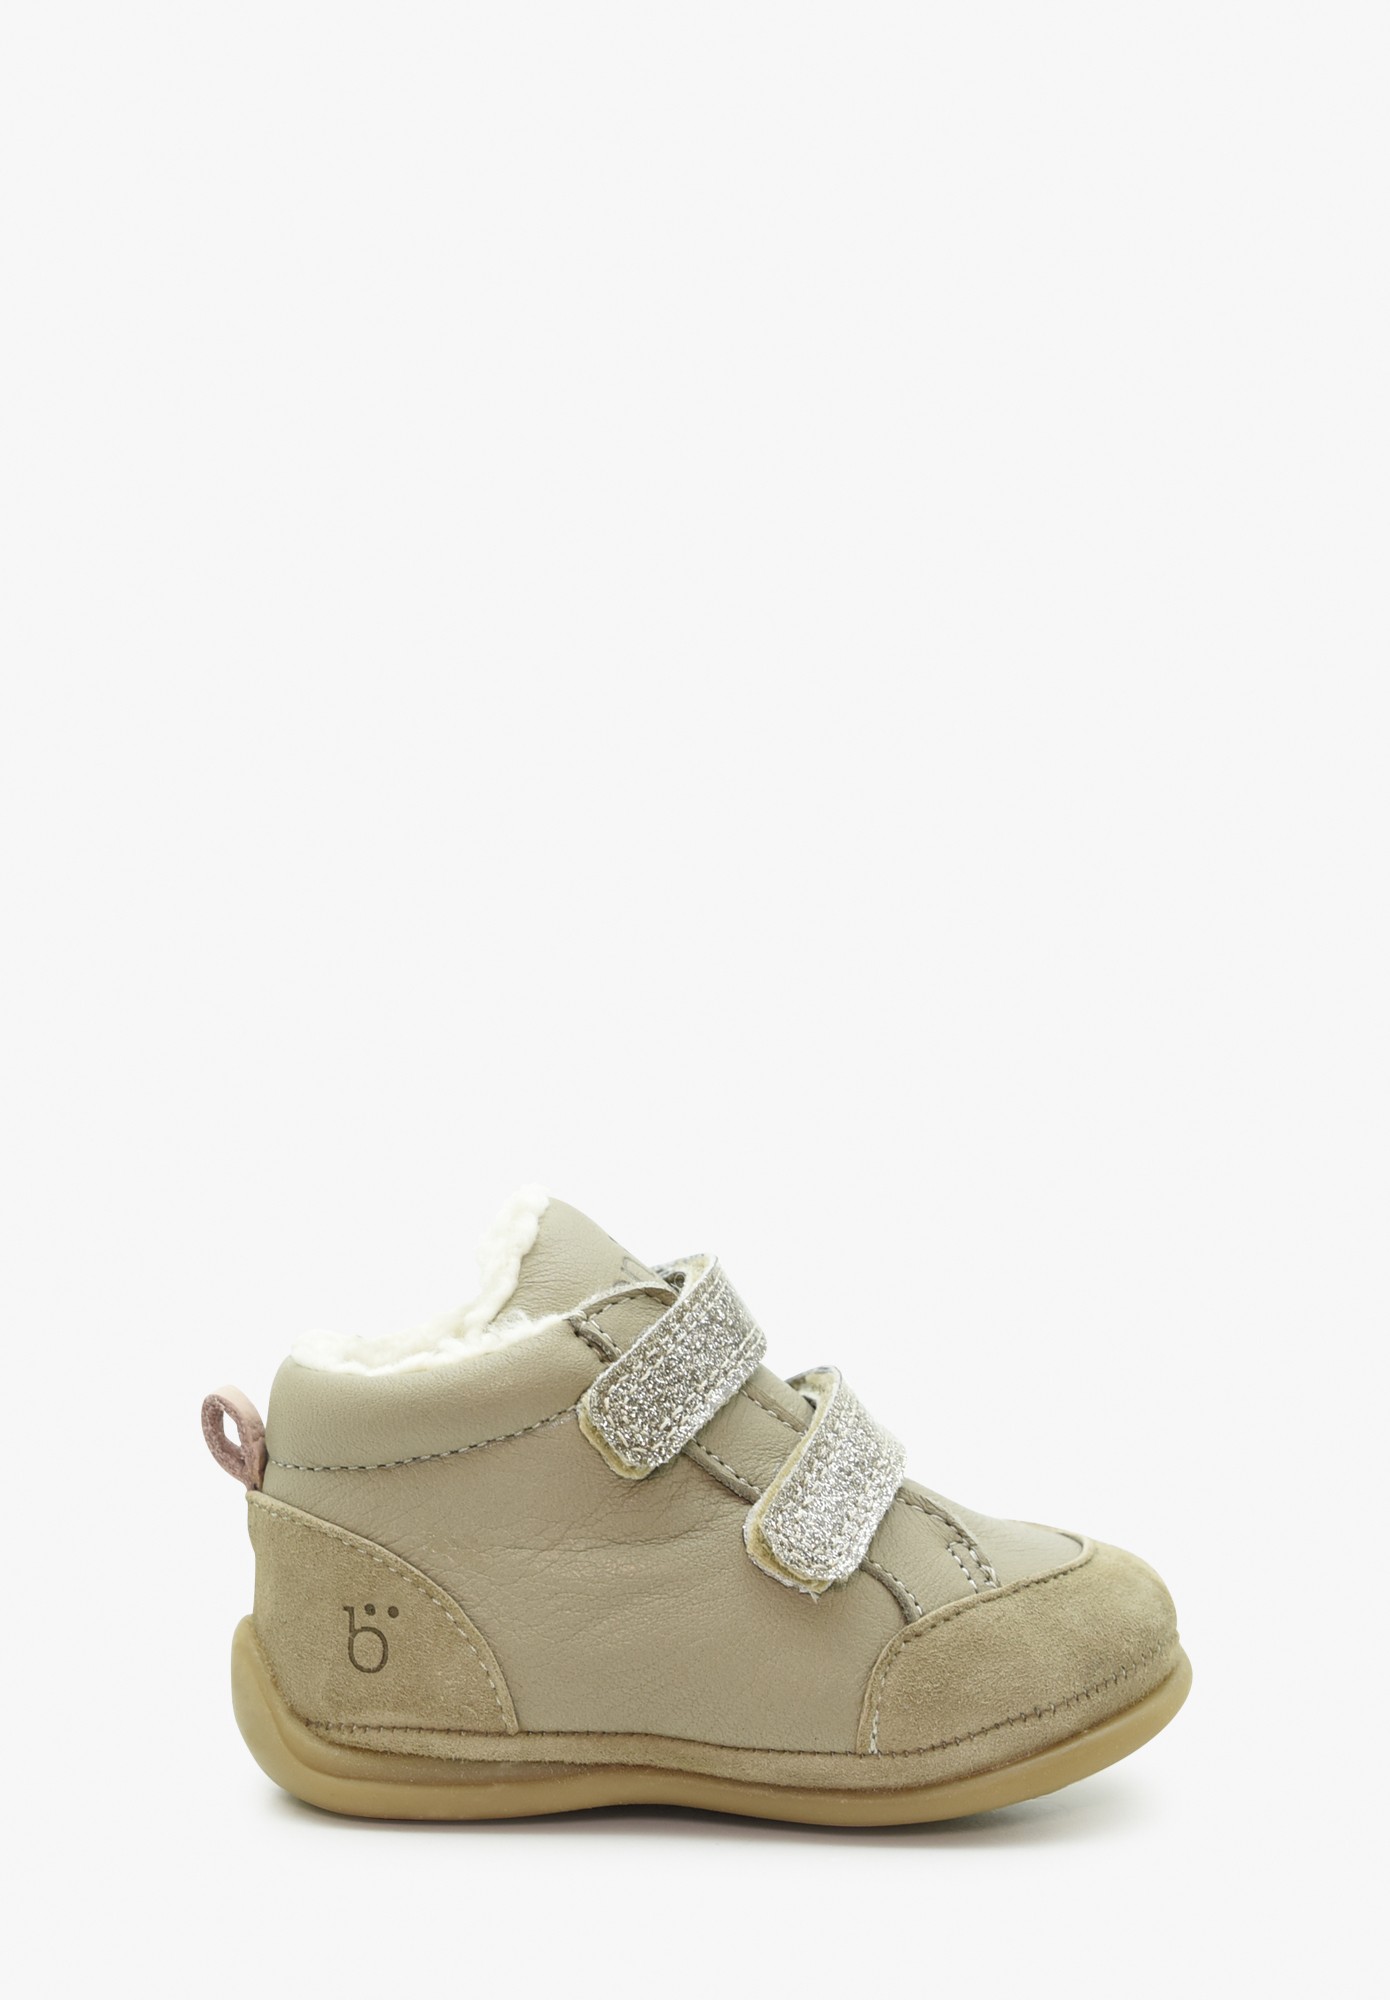 Baby shoes - Sneakers - Girl